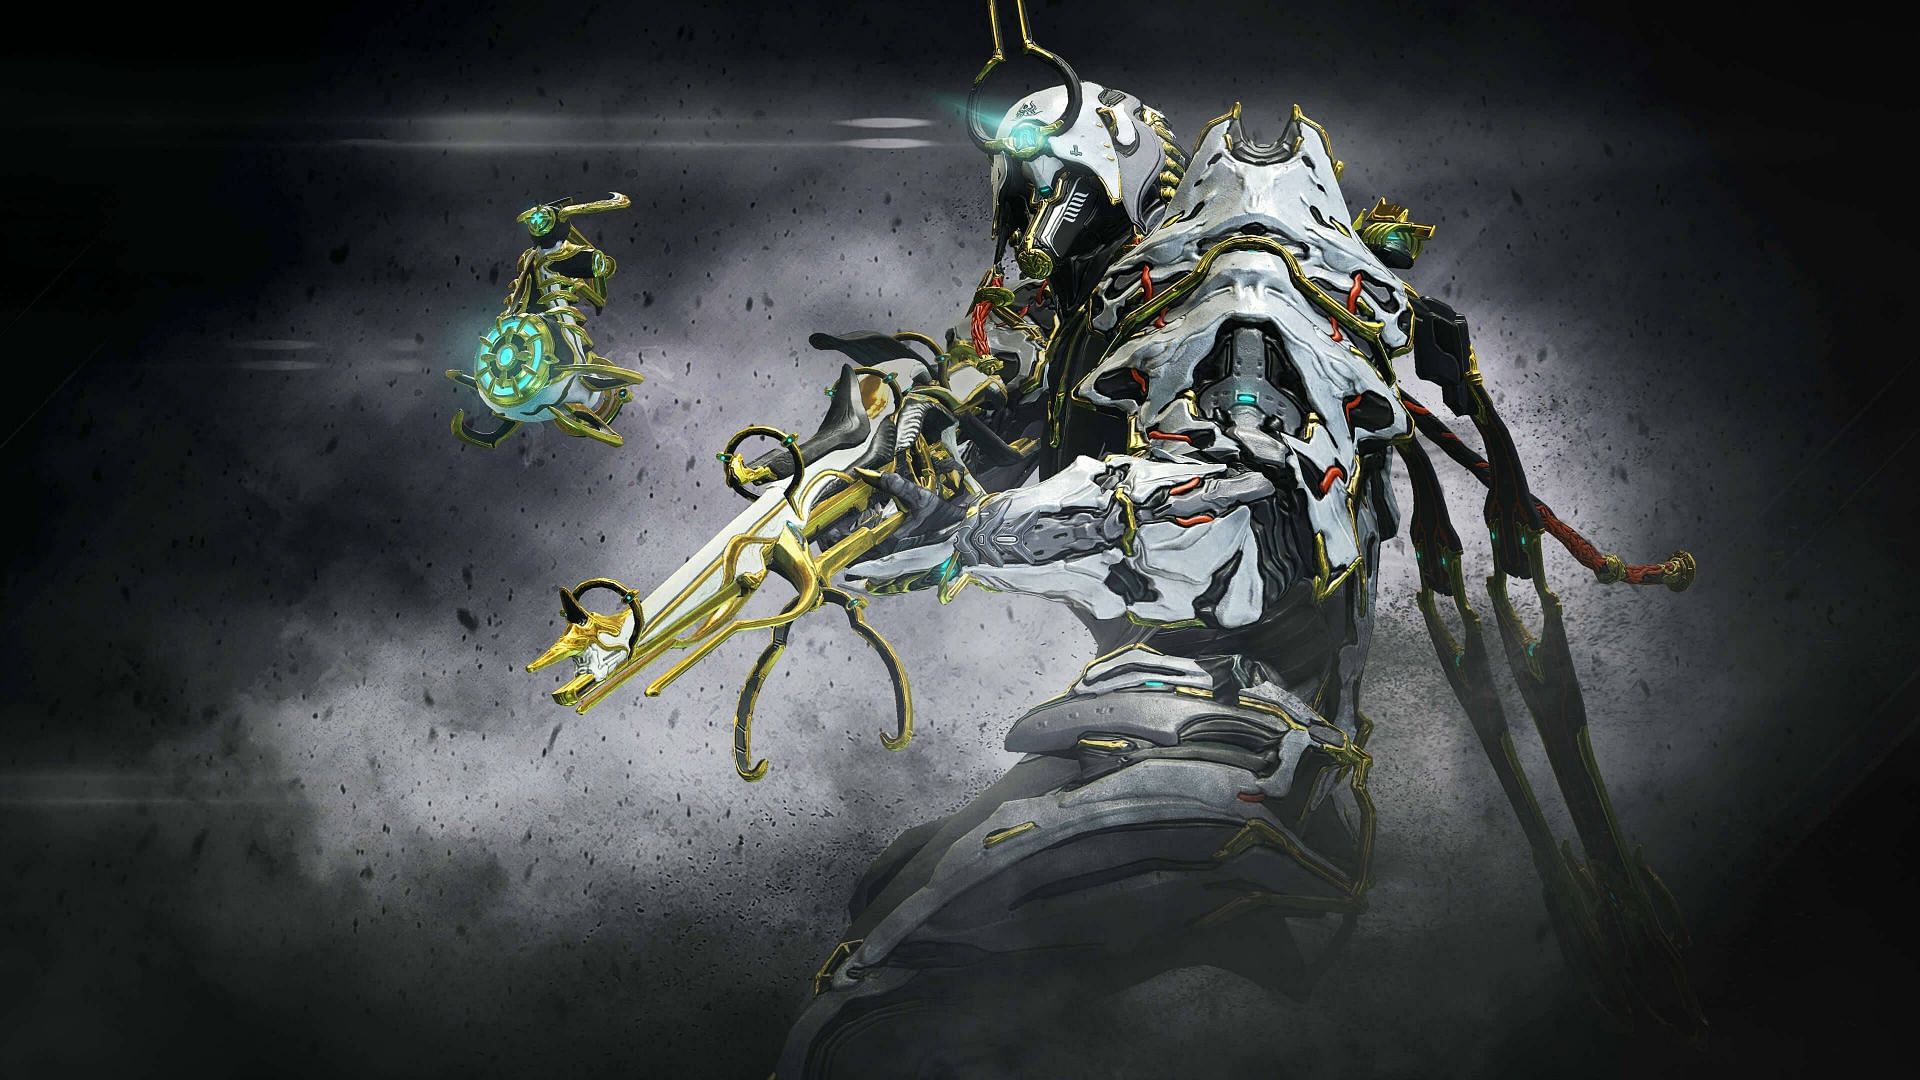 Void Relics are the only way to get primed parts in Waframe (image via Digital Extremes)